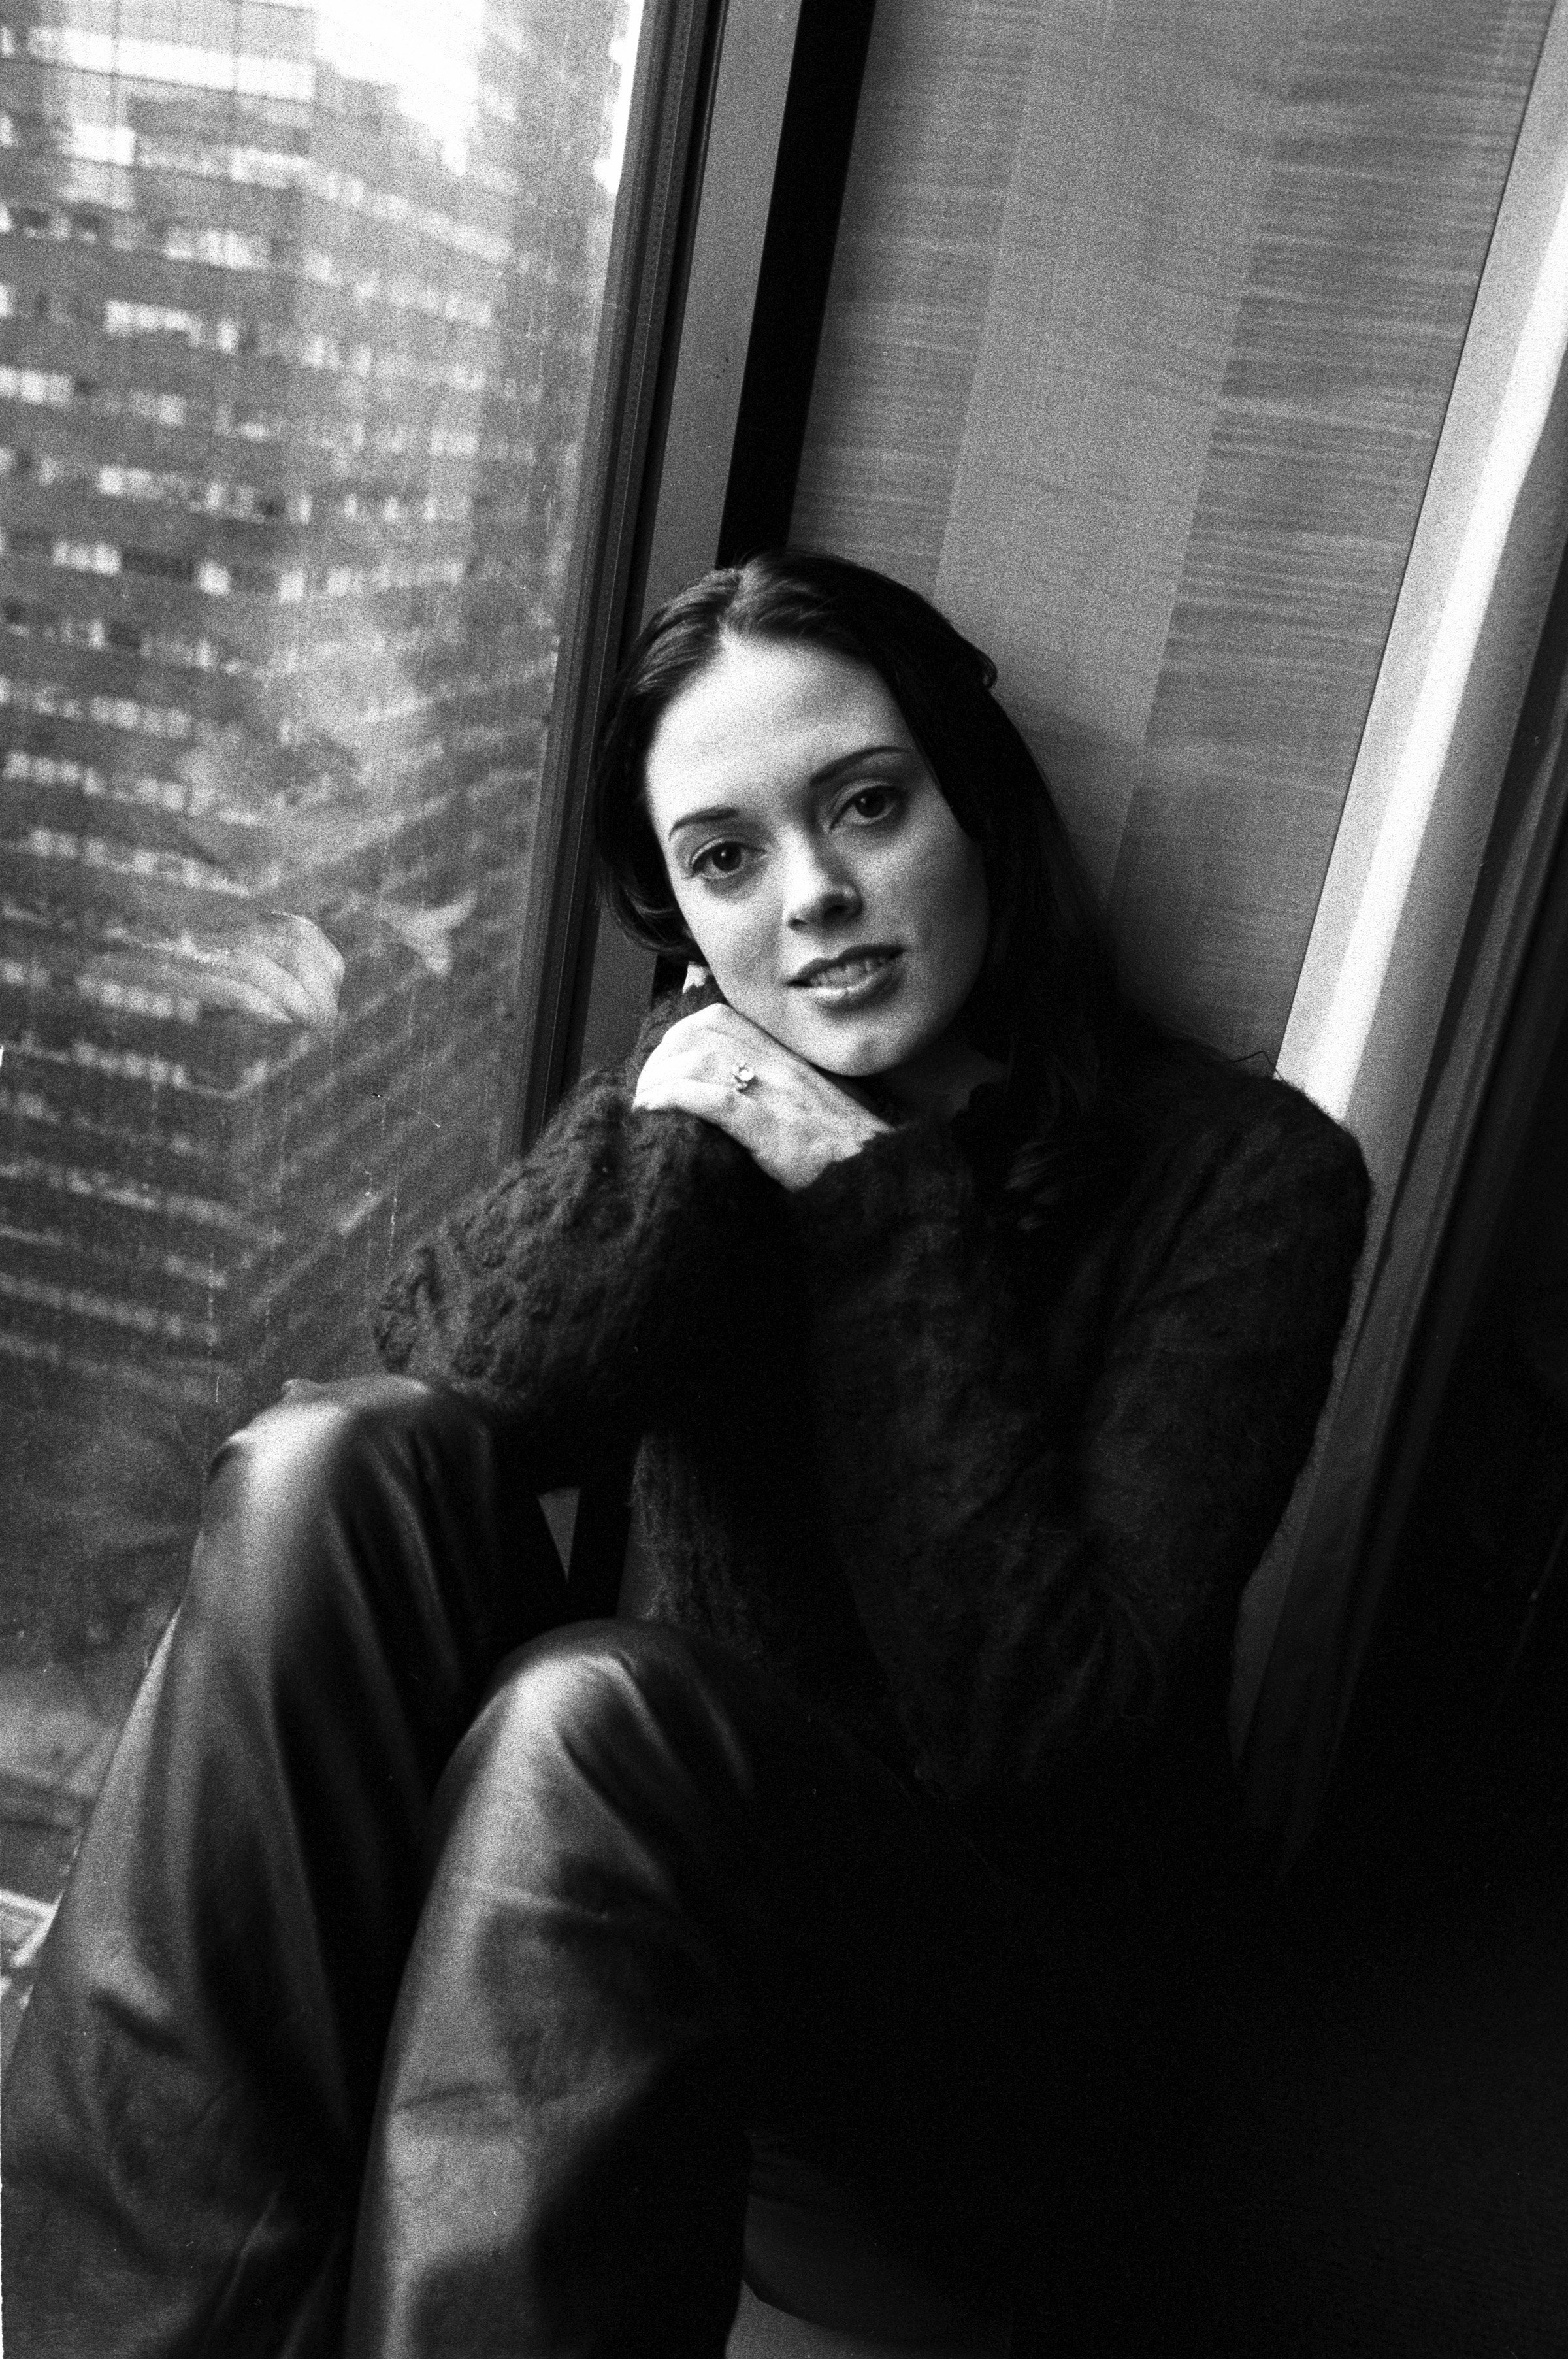 Rose McGowan poses for a portrait in New York City in February 1999. | Source: Getty Images